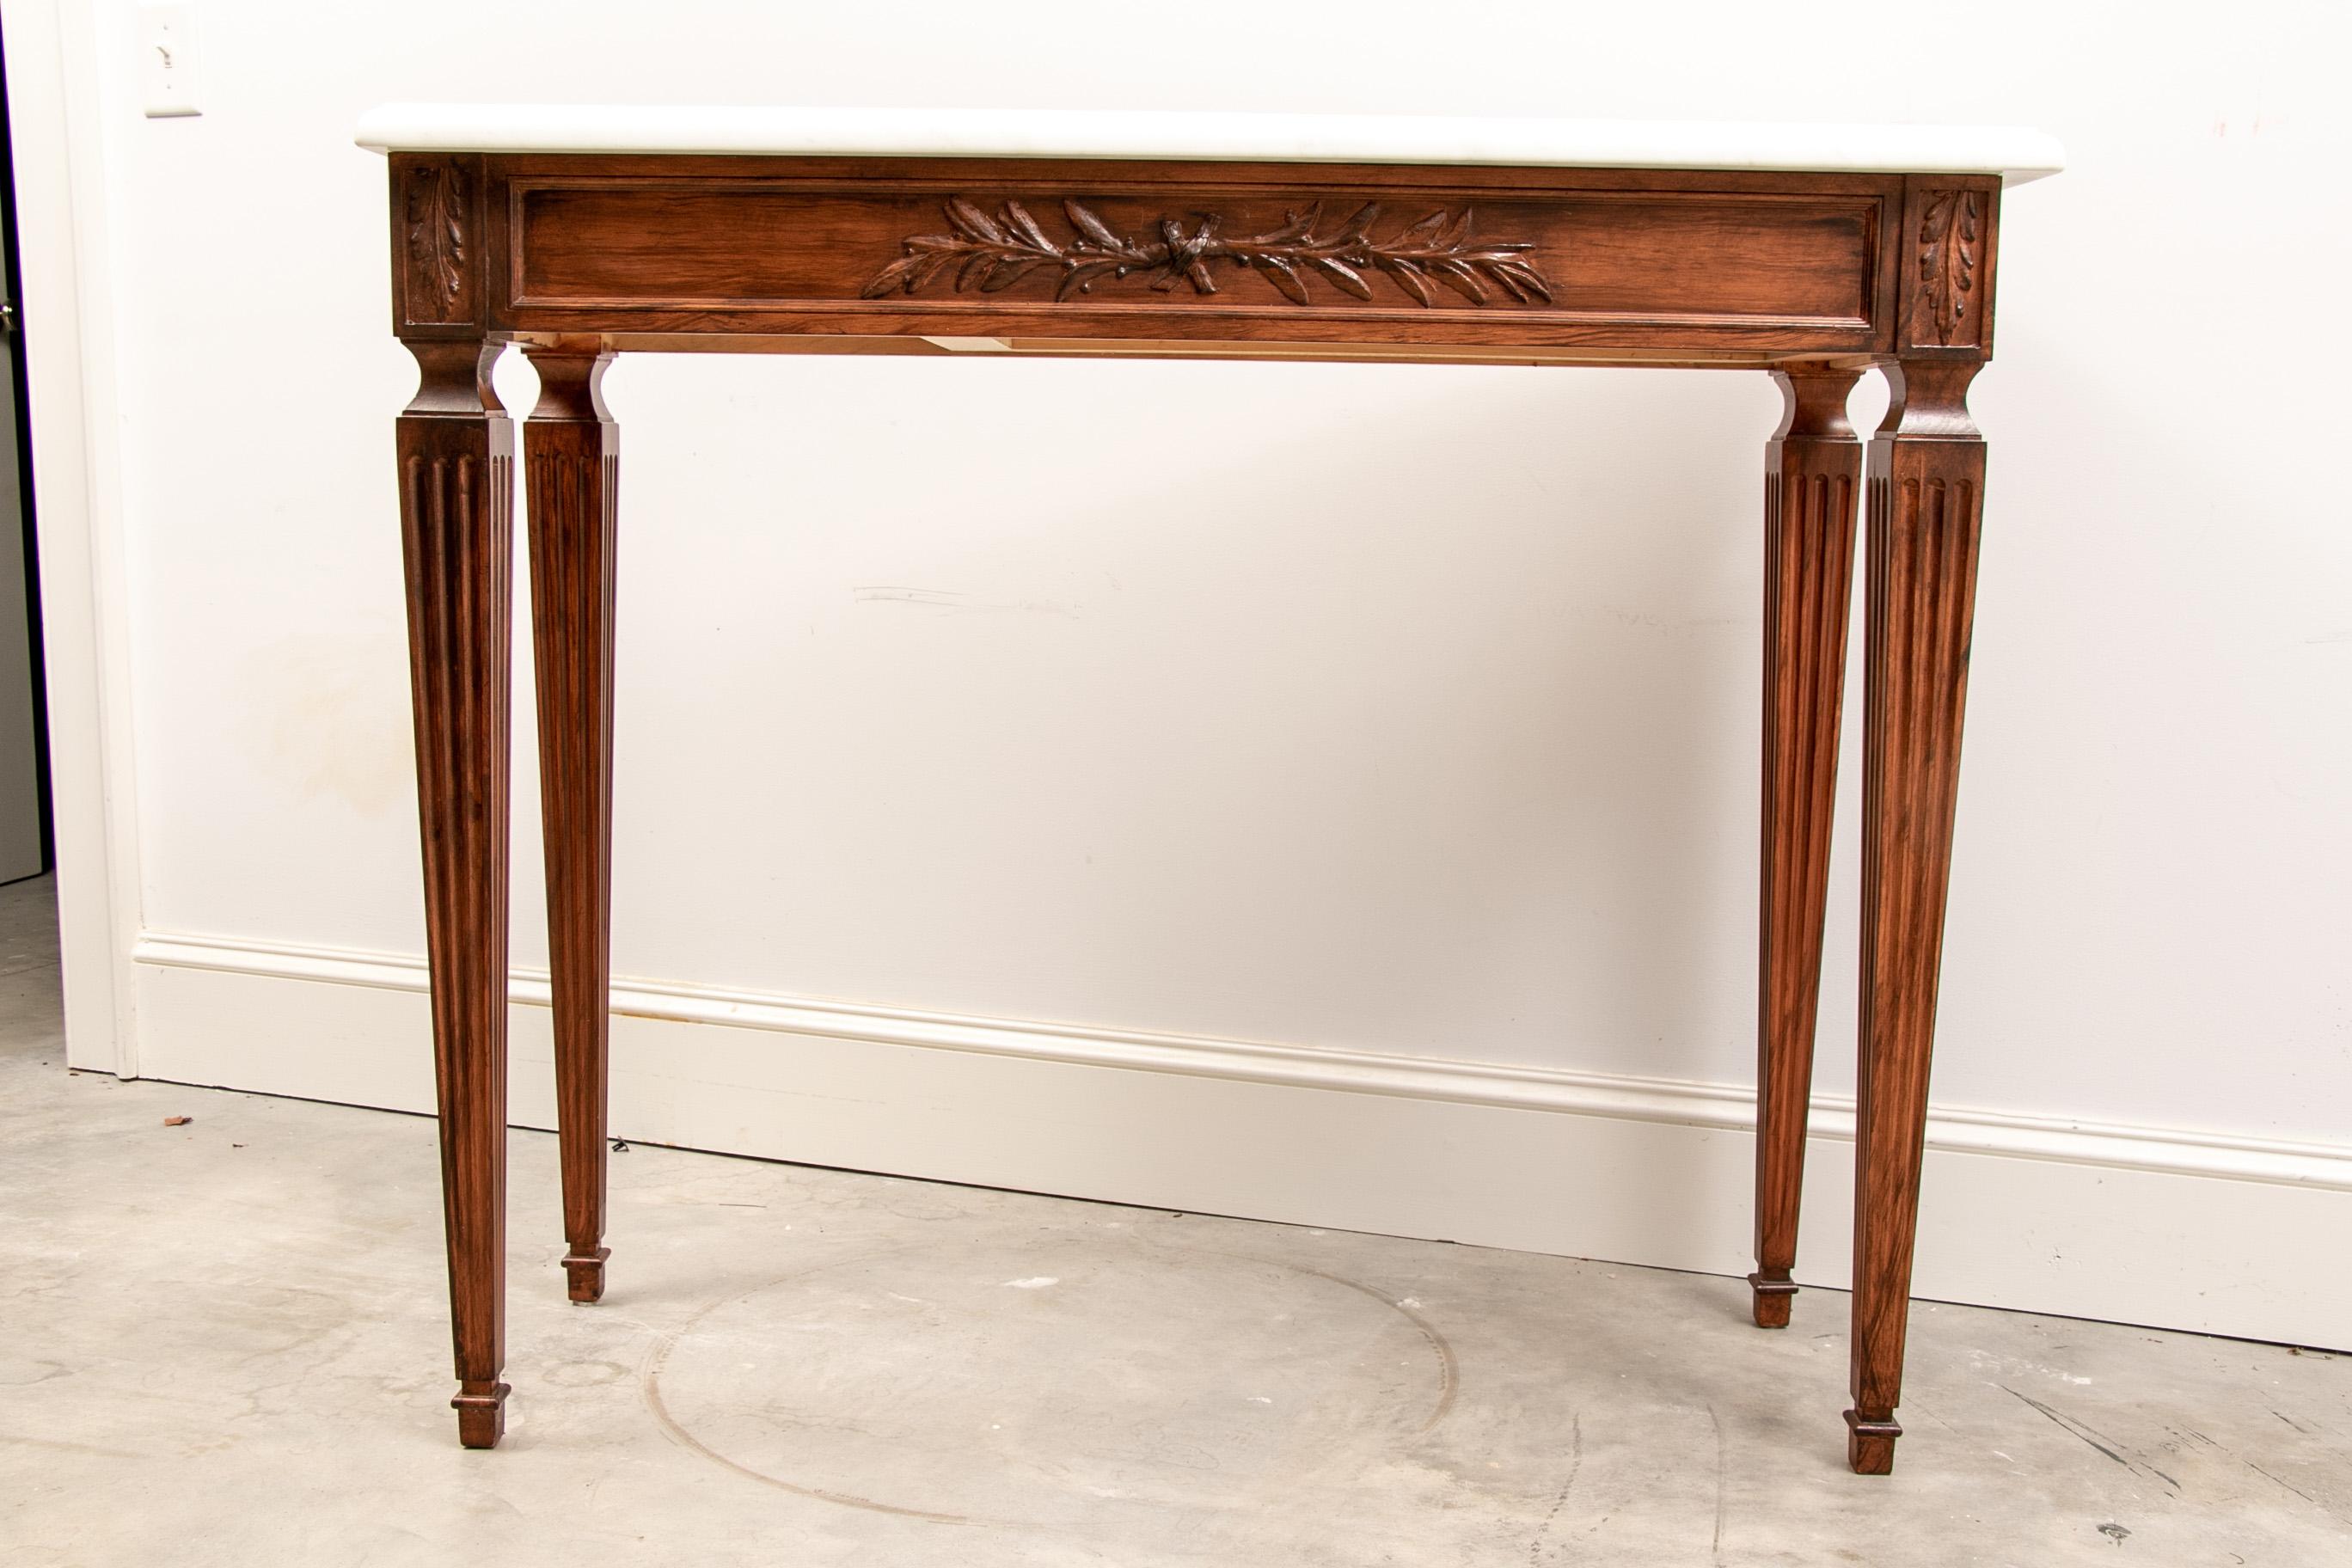 Pair of extraordinary custom Regency style marble top consoles, beautifully crafted and finished pair of custom made consoles in Regency style. Tables feature tapering receded legs, acanthus leaf and foliate accents, hidden side drawers, finished